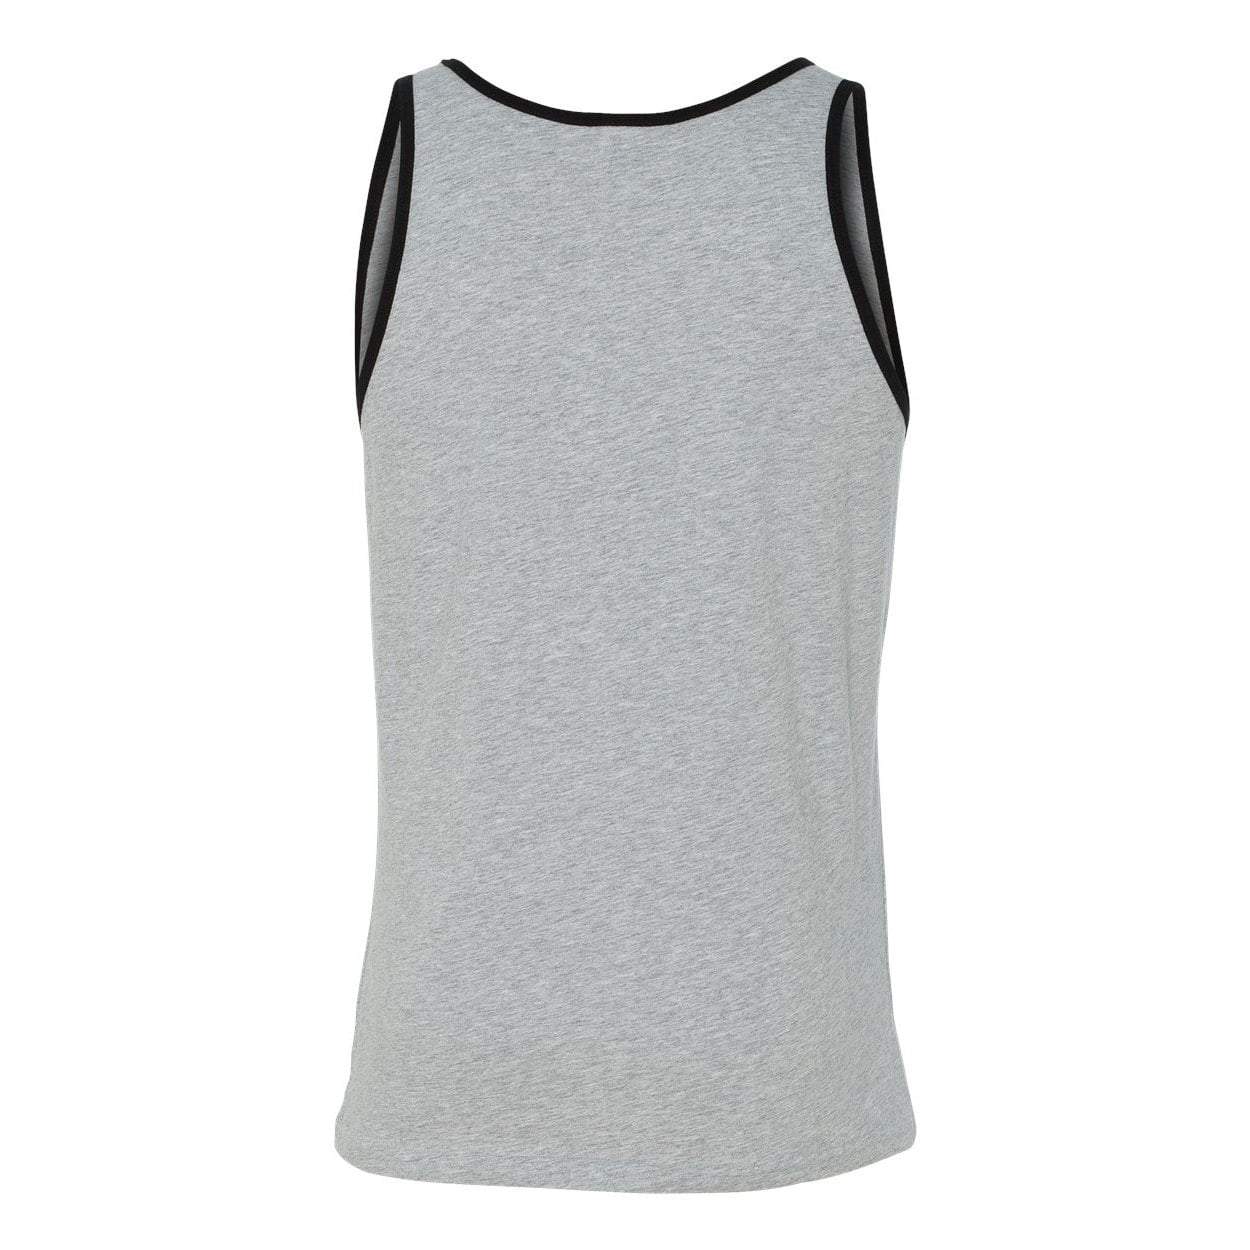 Rugby Imports RUK OVR Tank Top - Heather/Black